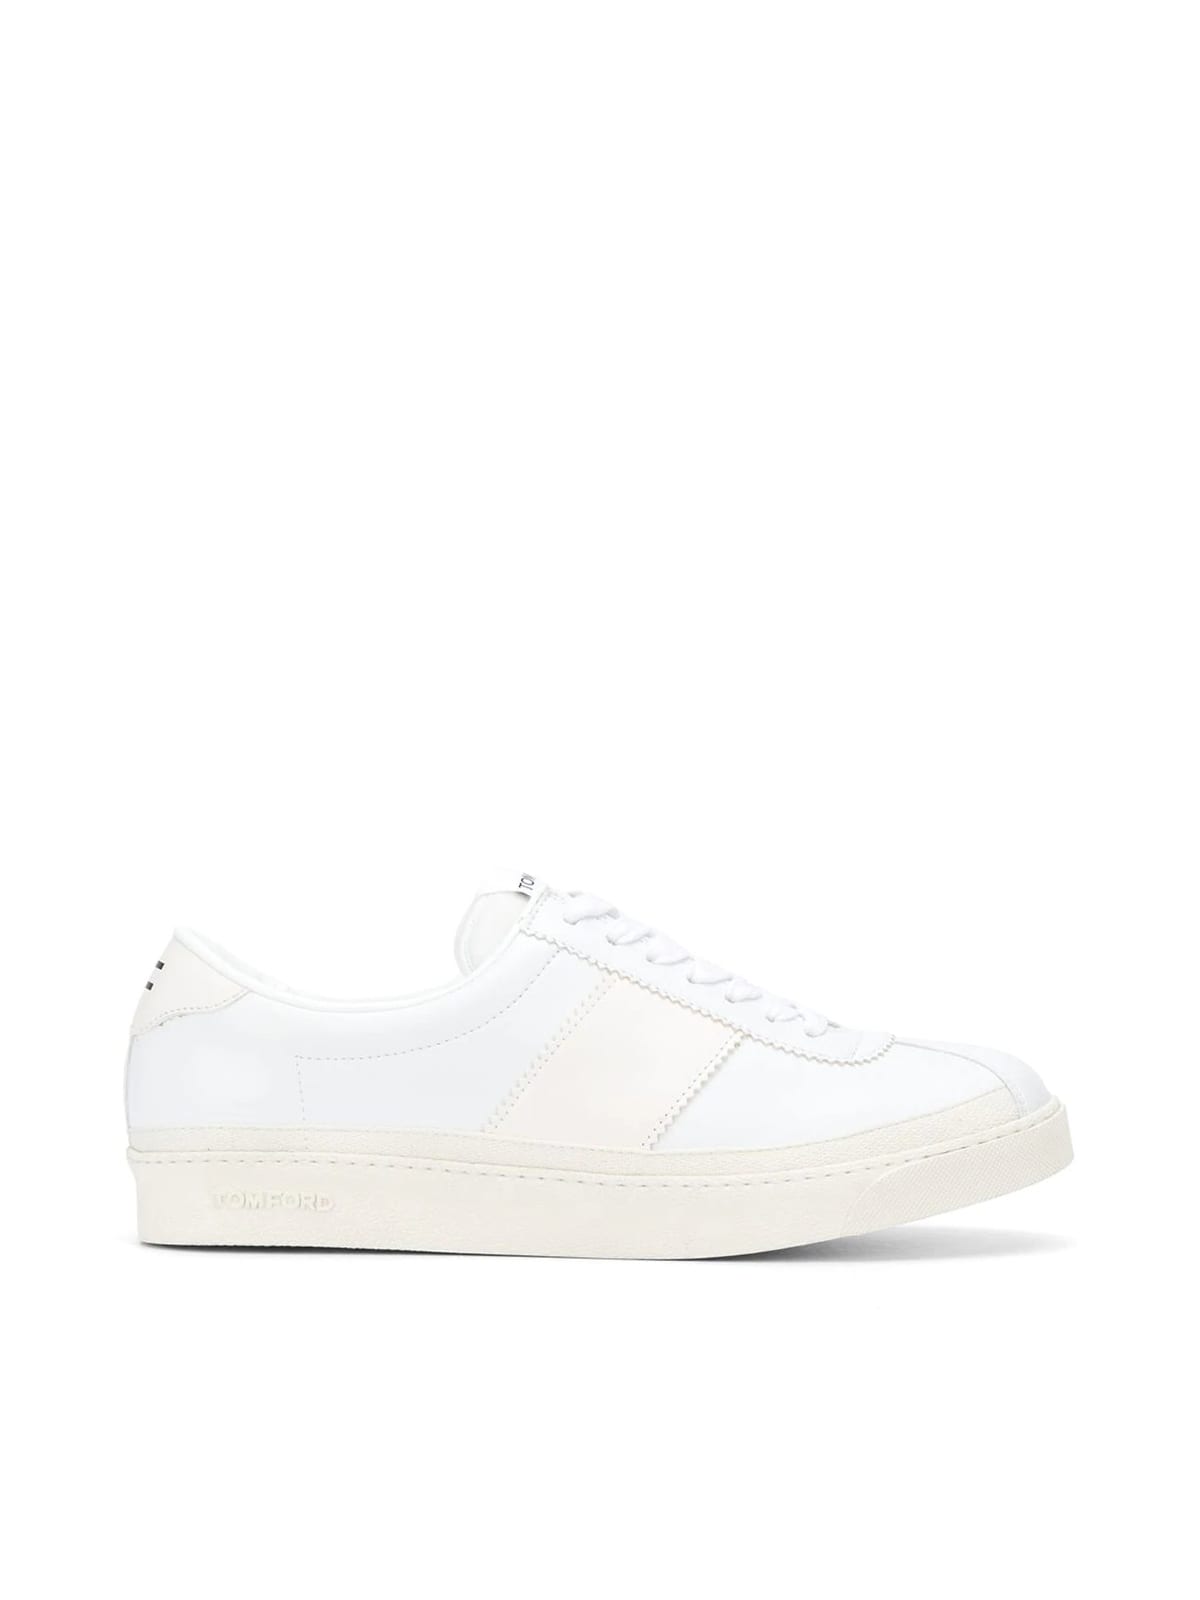 TOM FORD NEW SNEAKERS,11518150